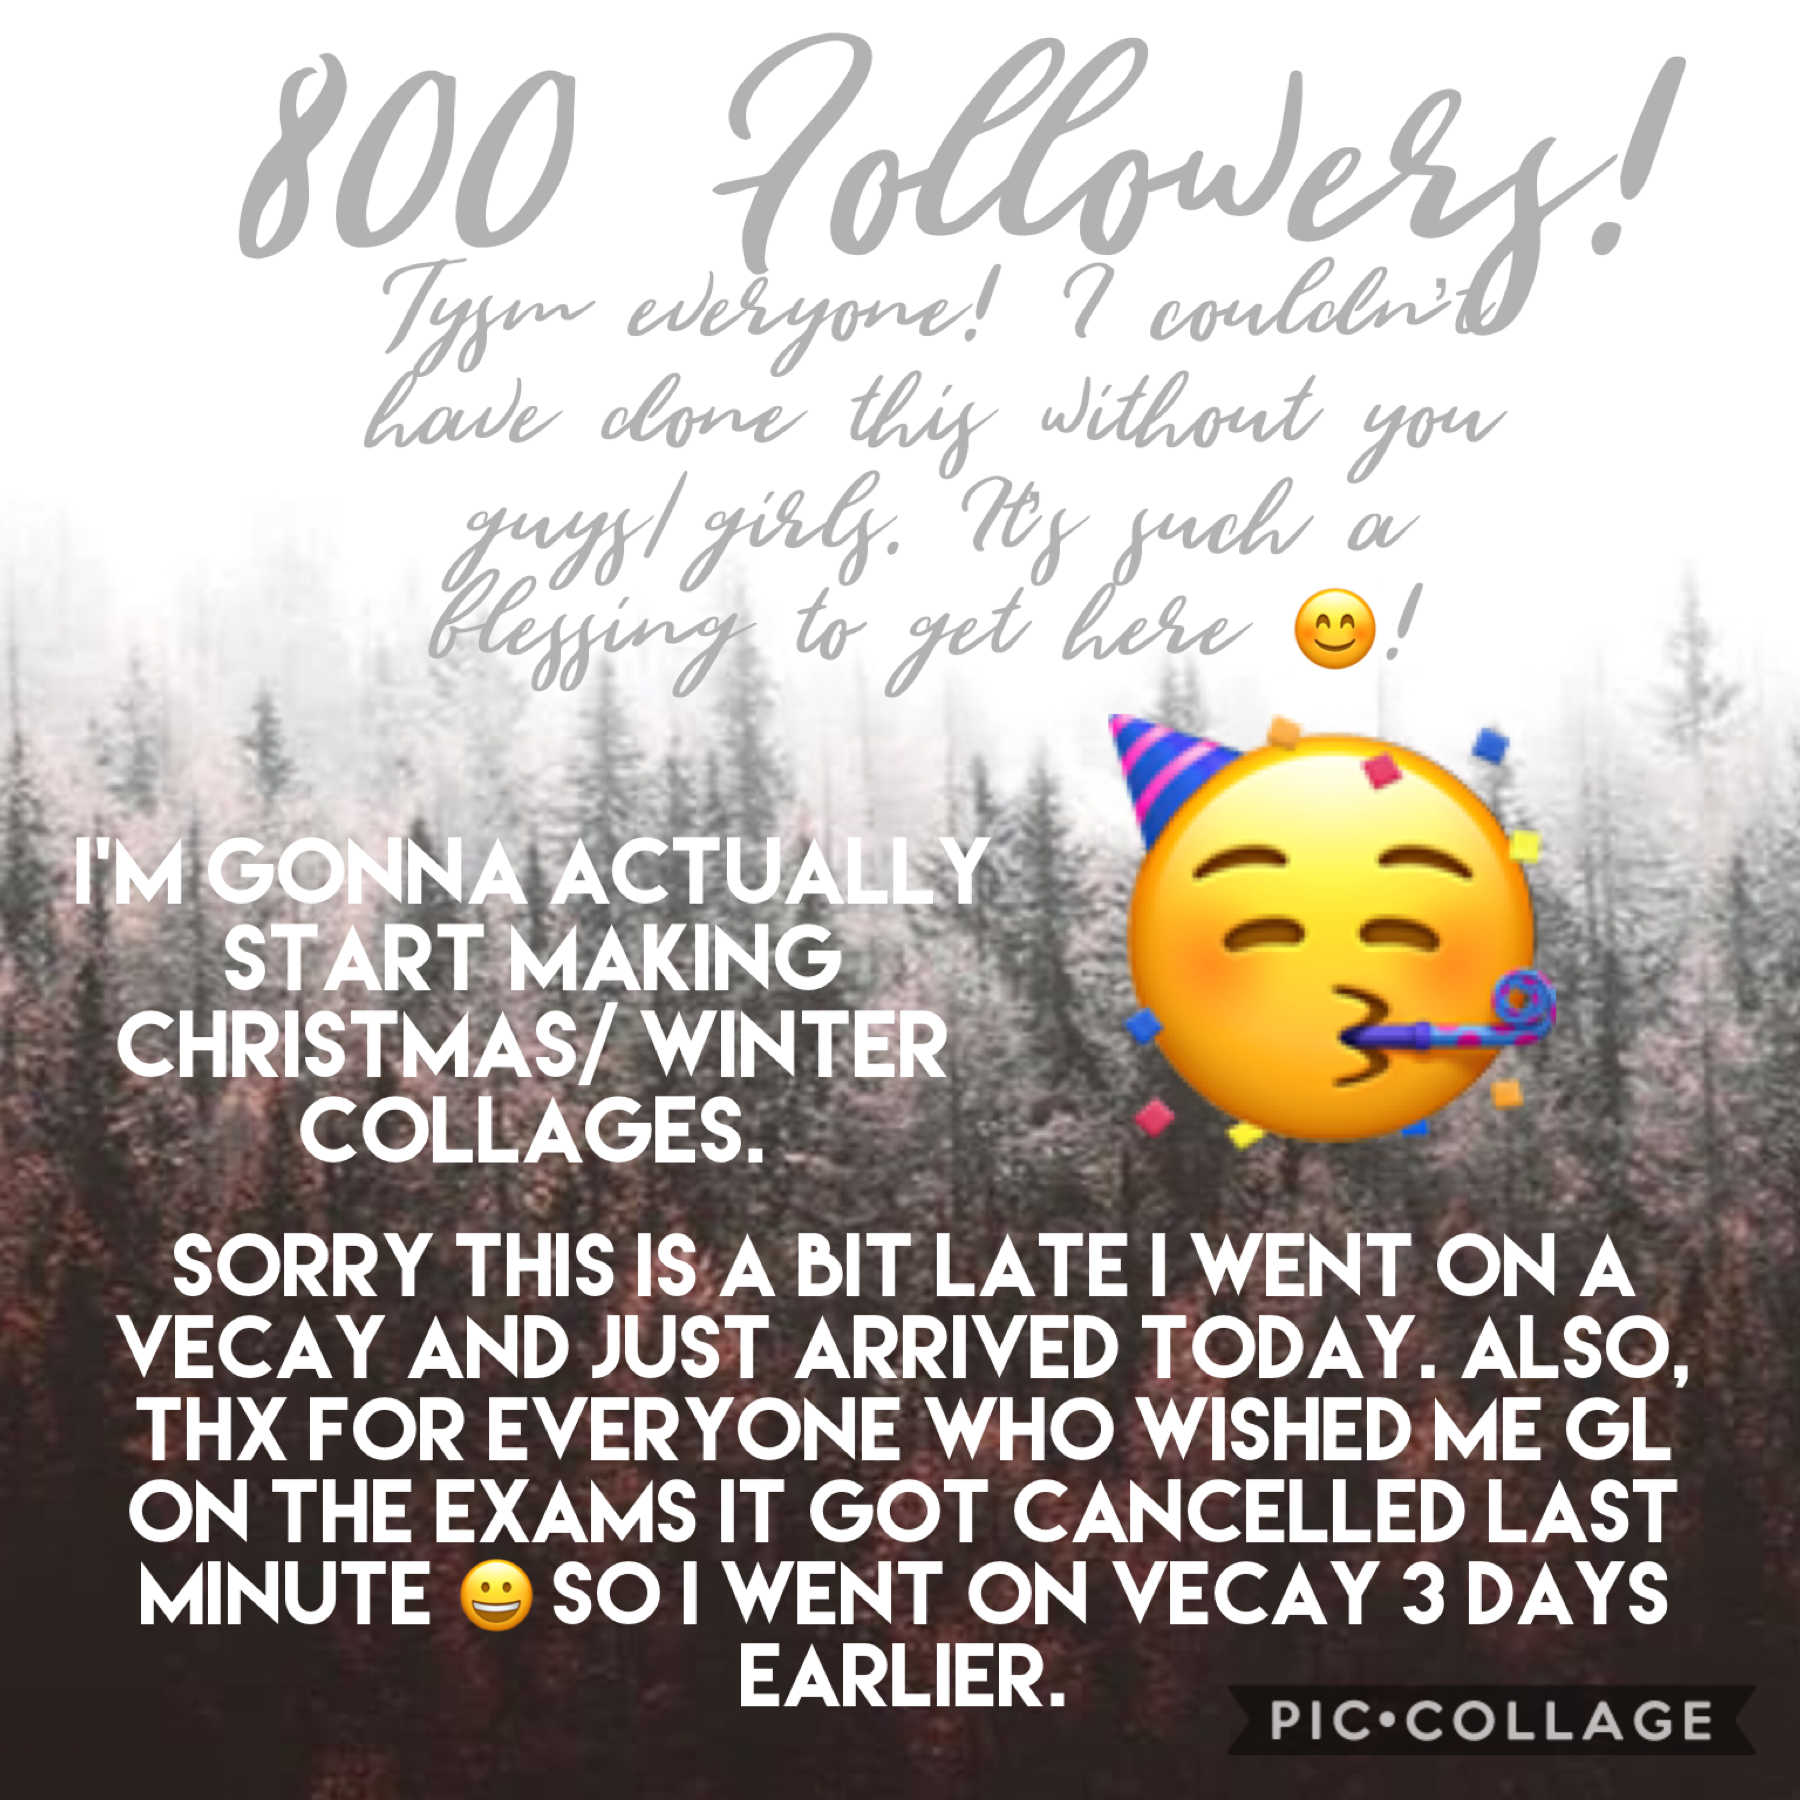 Hey guys! Sorry this is so late! I went on a fun vecay for a week so I wasn’t able to be on PC. Thx for understanding, and thx for 800!